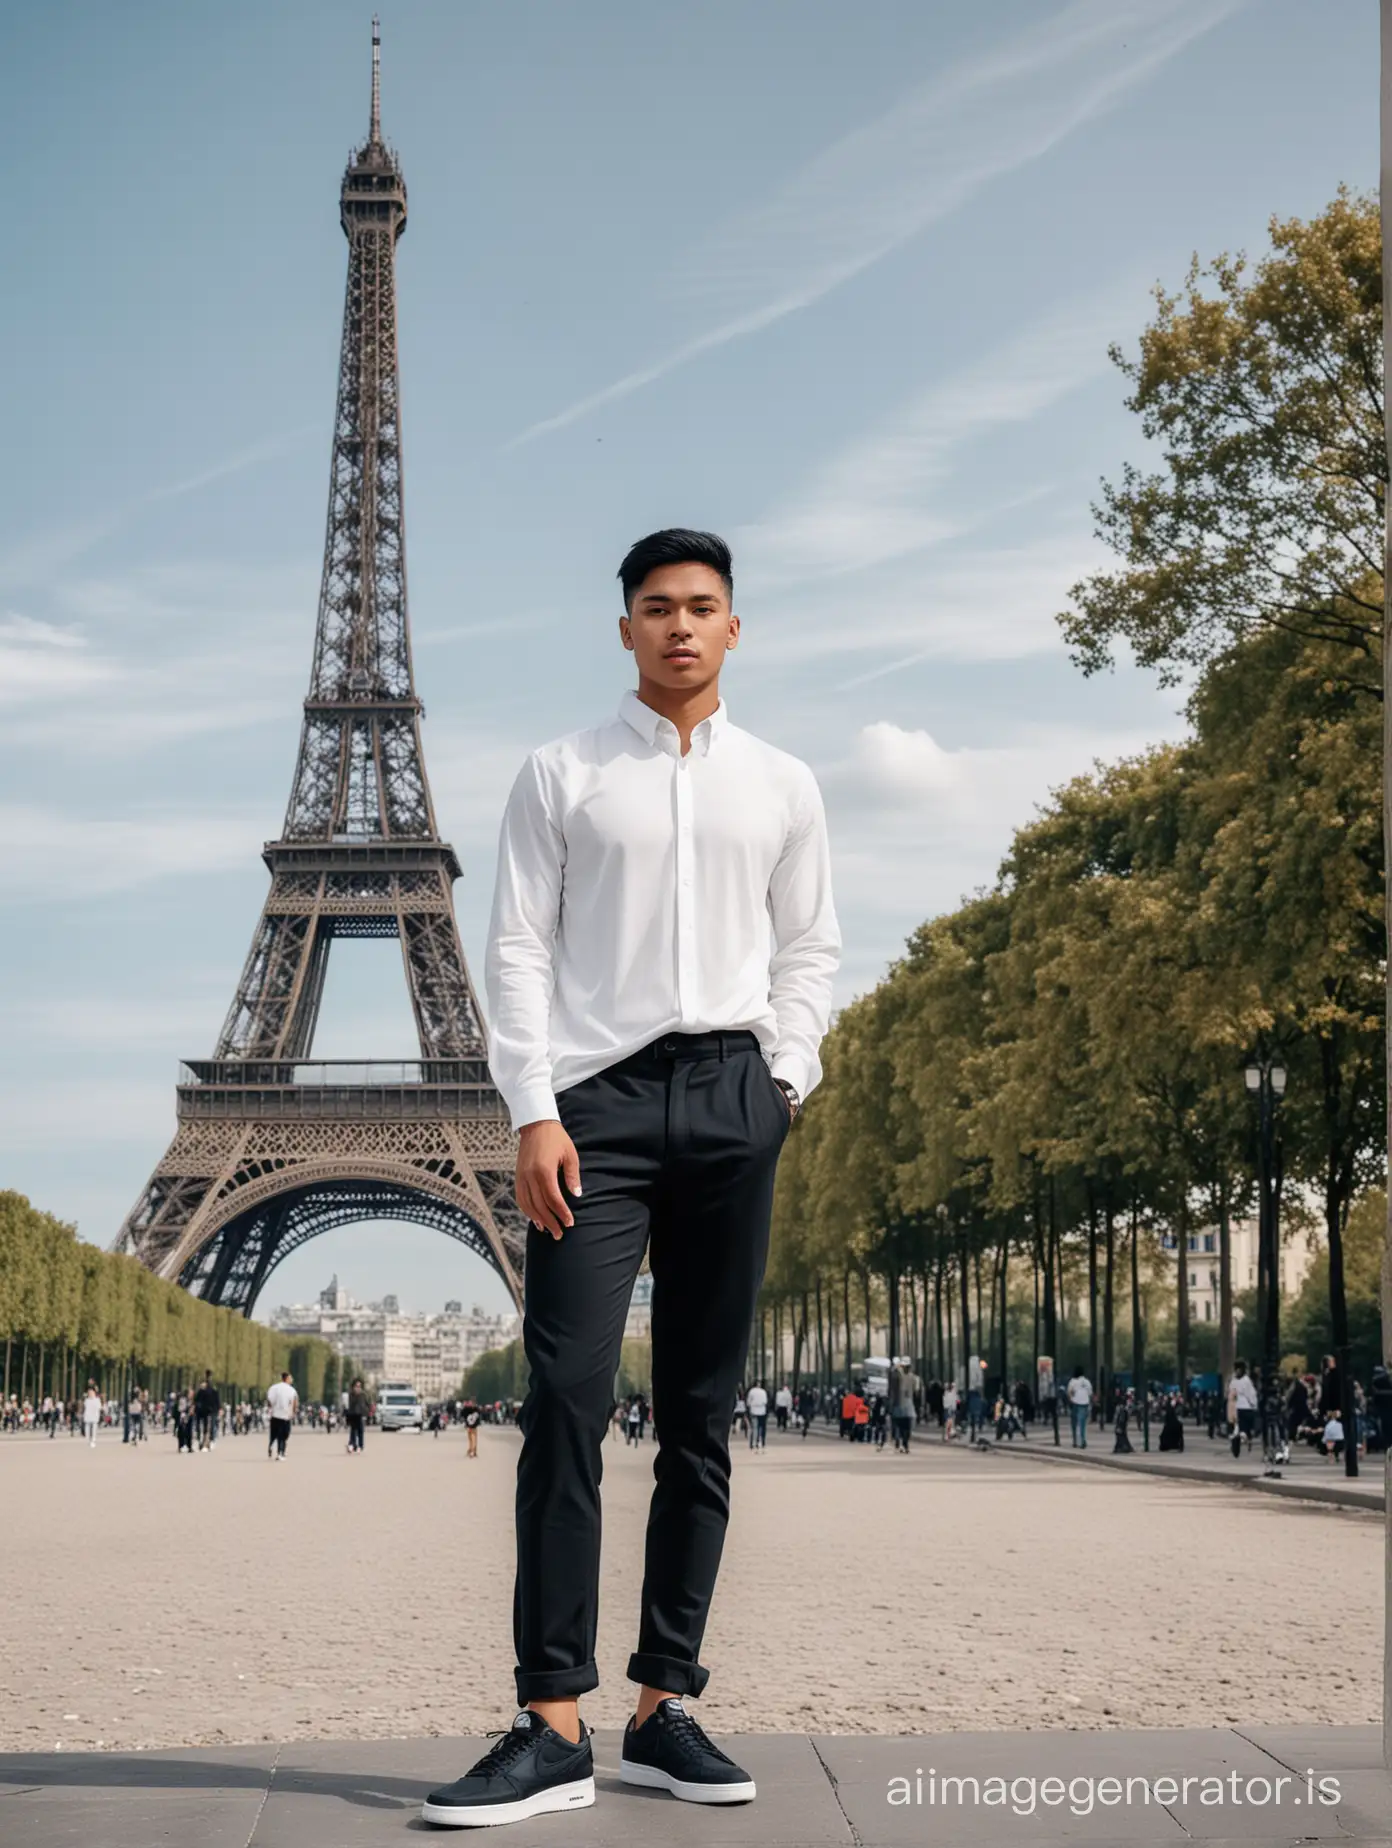 Handsome-Indonesian-Man-in-Fashionable-Outfit-with-Eiffel-Tower